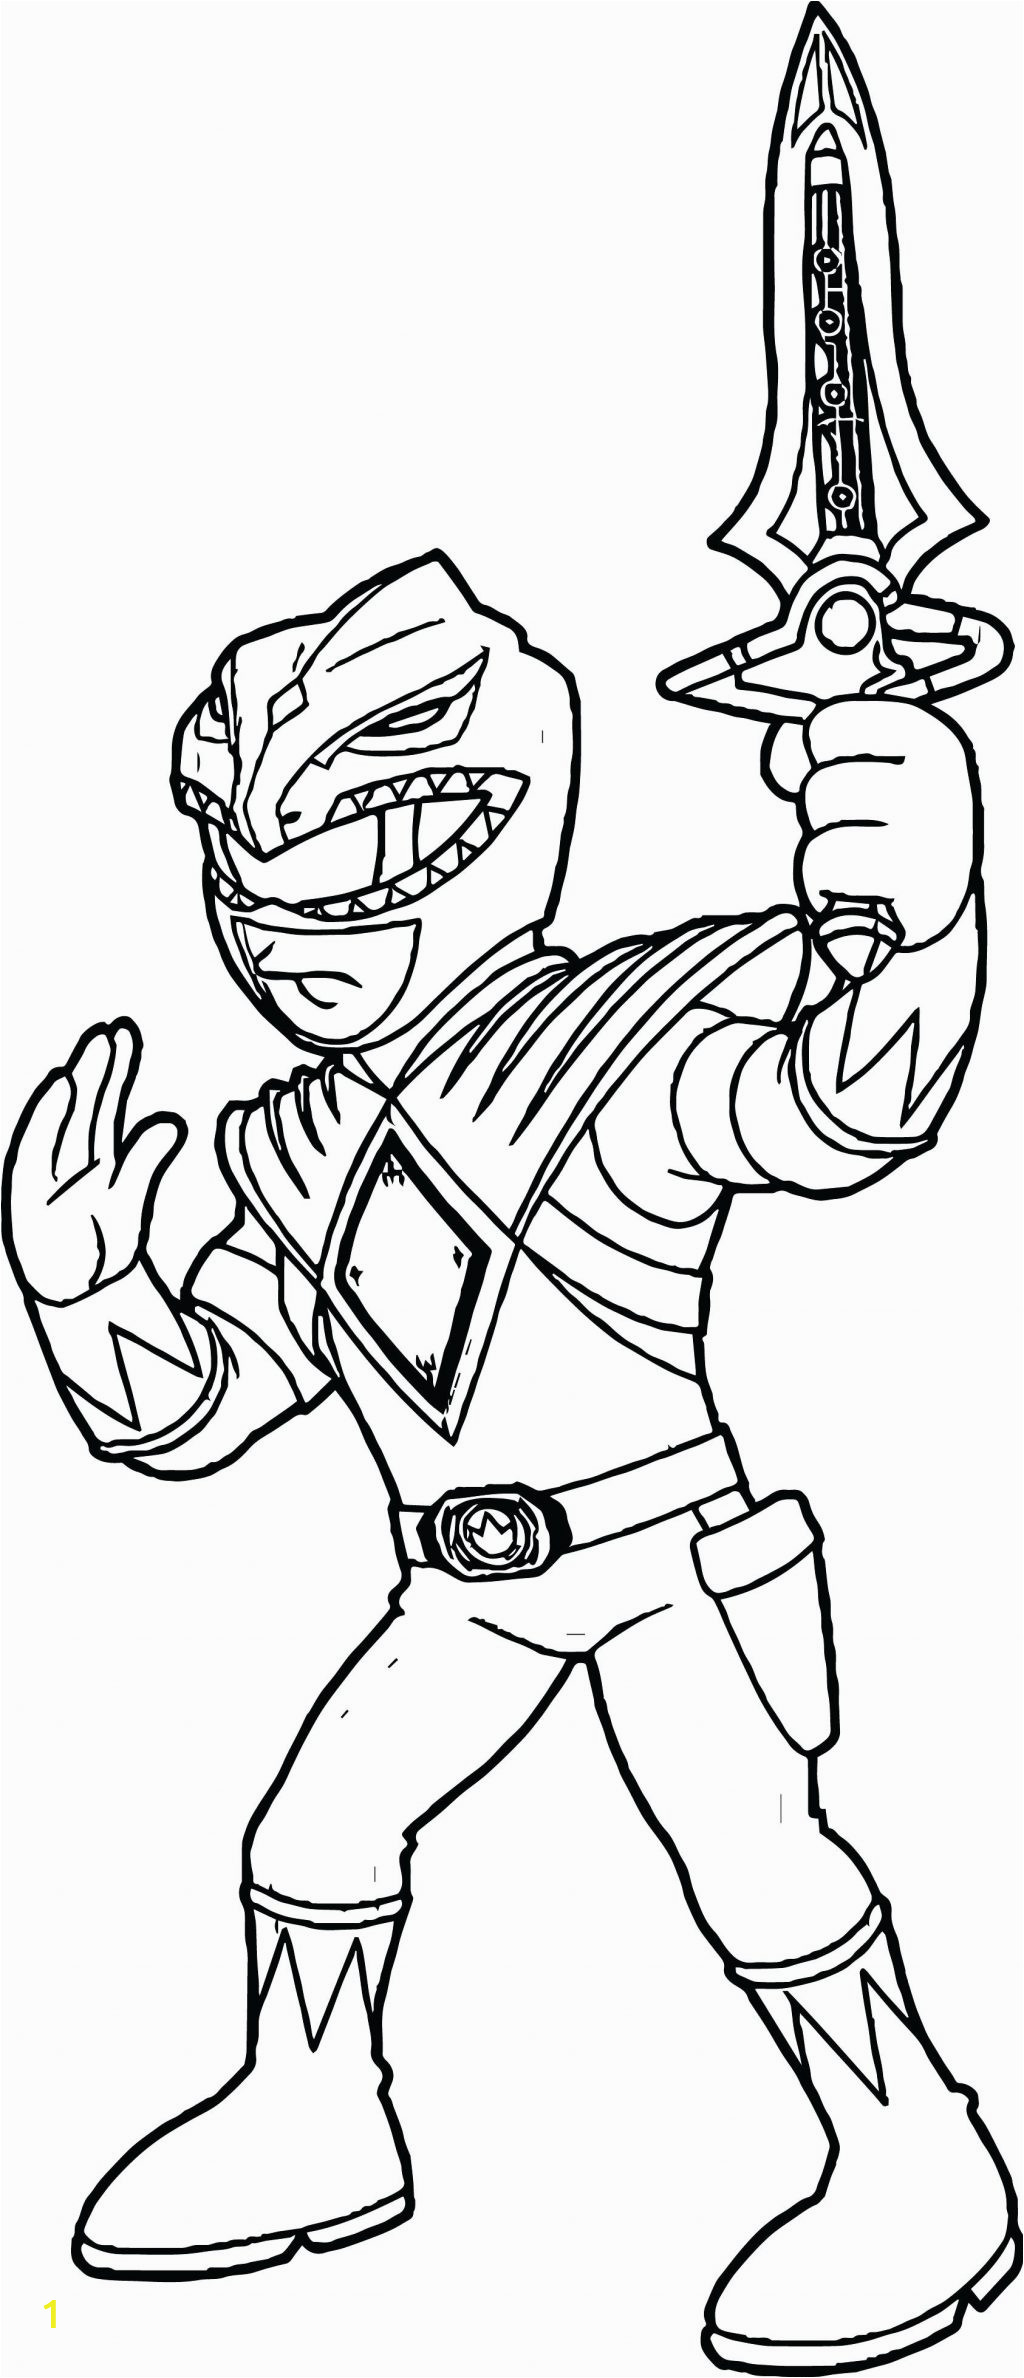 green ranger coloring pages